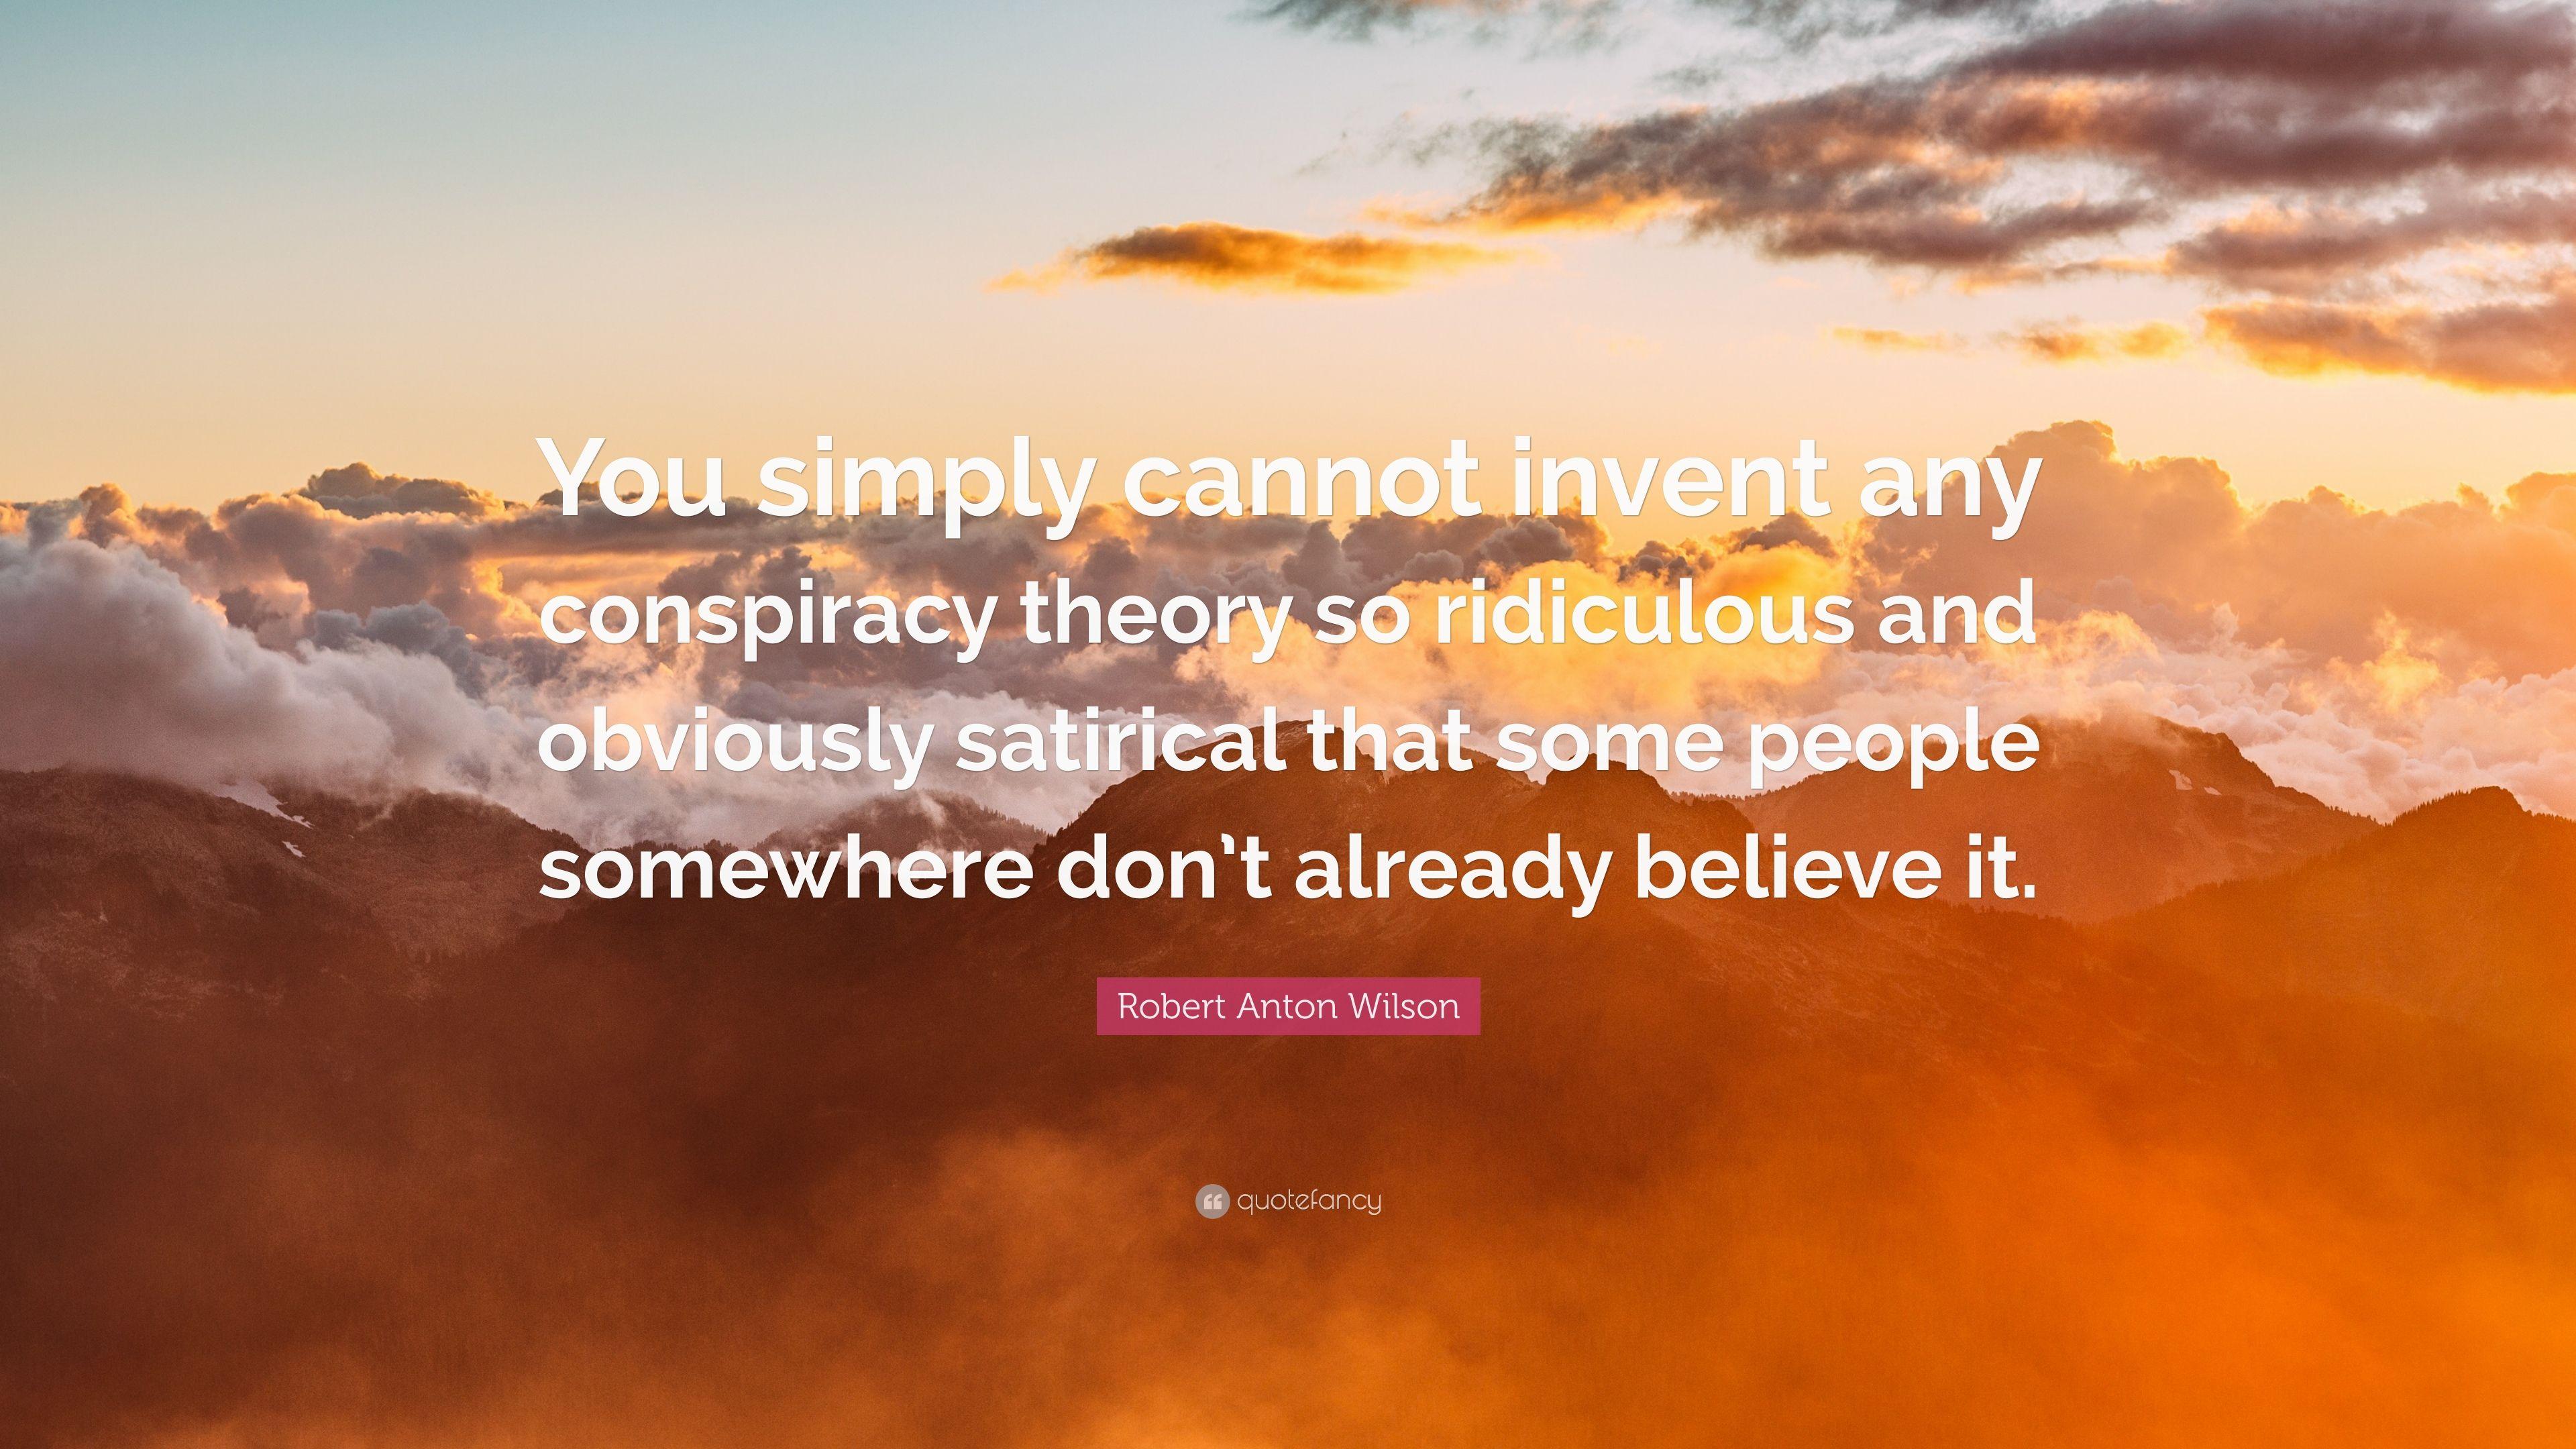 Robert Anton Wilson Quote: “You simply cannot invent any conspiracy